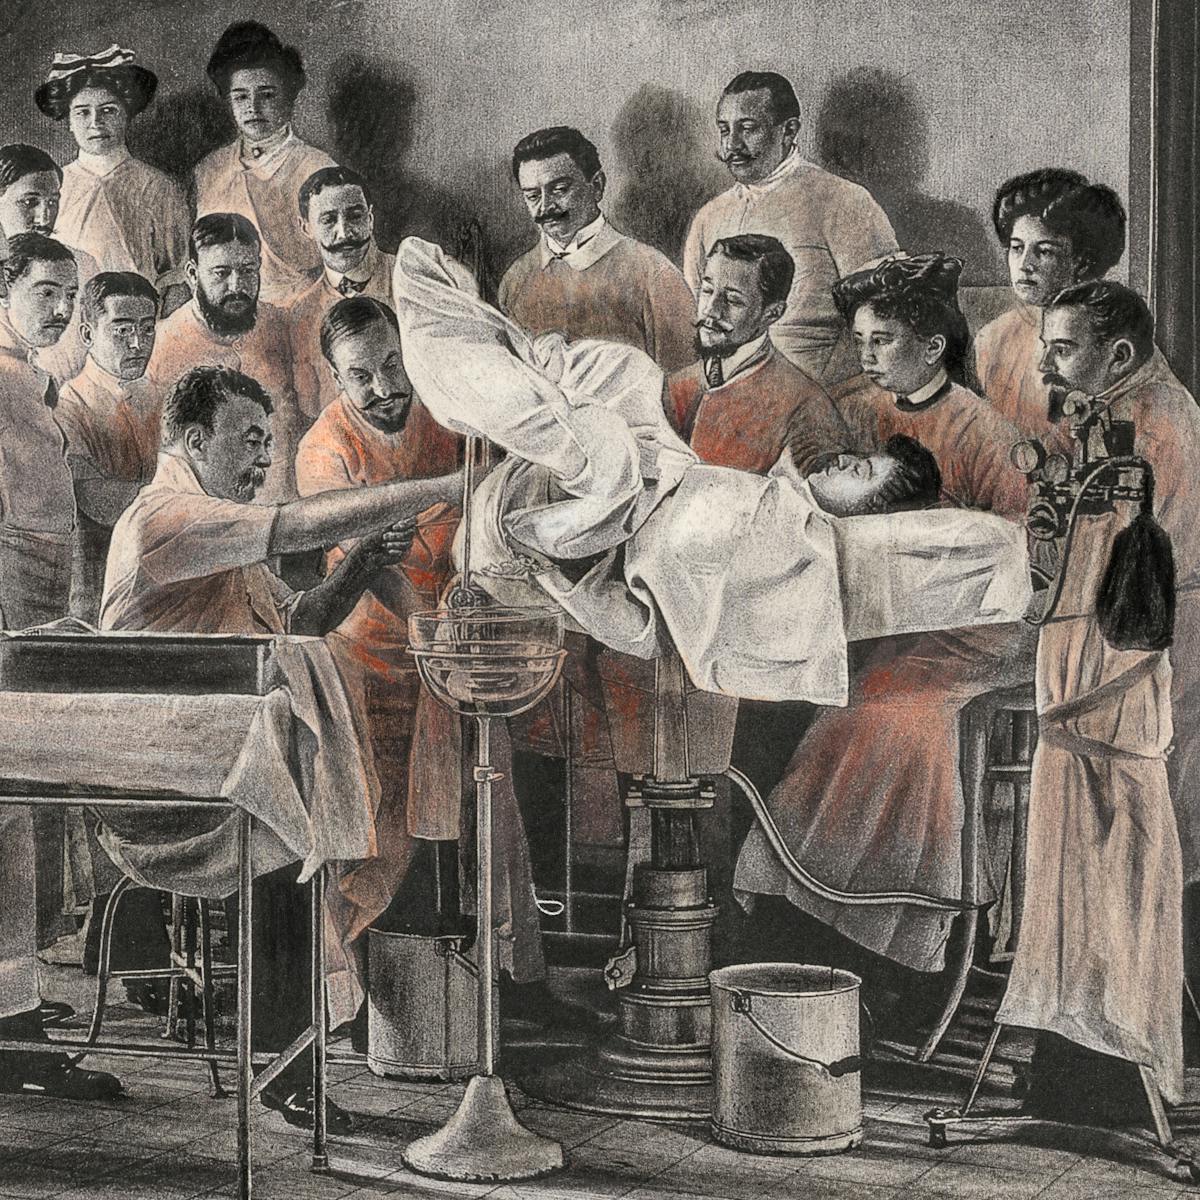 Pencil artwork drawn over an engraving of a photograph from the early 1900s which depicts a vaginal hysterectomy. The patient is lying on an operating table, her legs stirrups, covered in a white cloth. She is surrounded by 19 people who are either involved in the operation or just observing. The group is made up of mainly men. The whole scene is black and white apart from the gowns of the surgeons and observers which are tinted red.